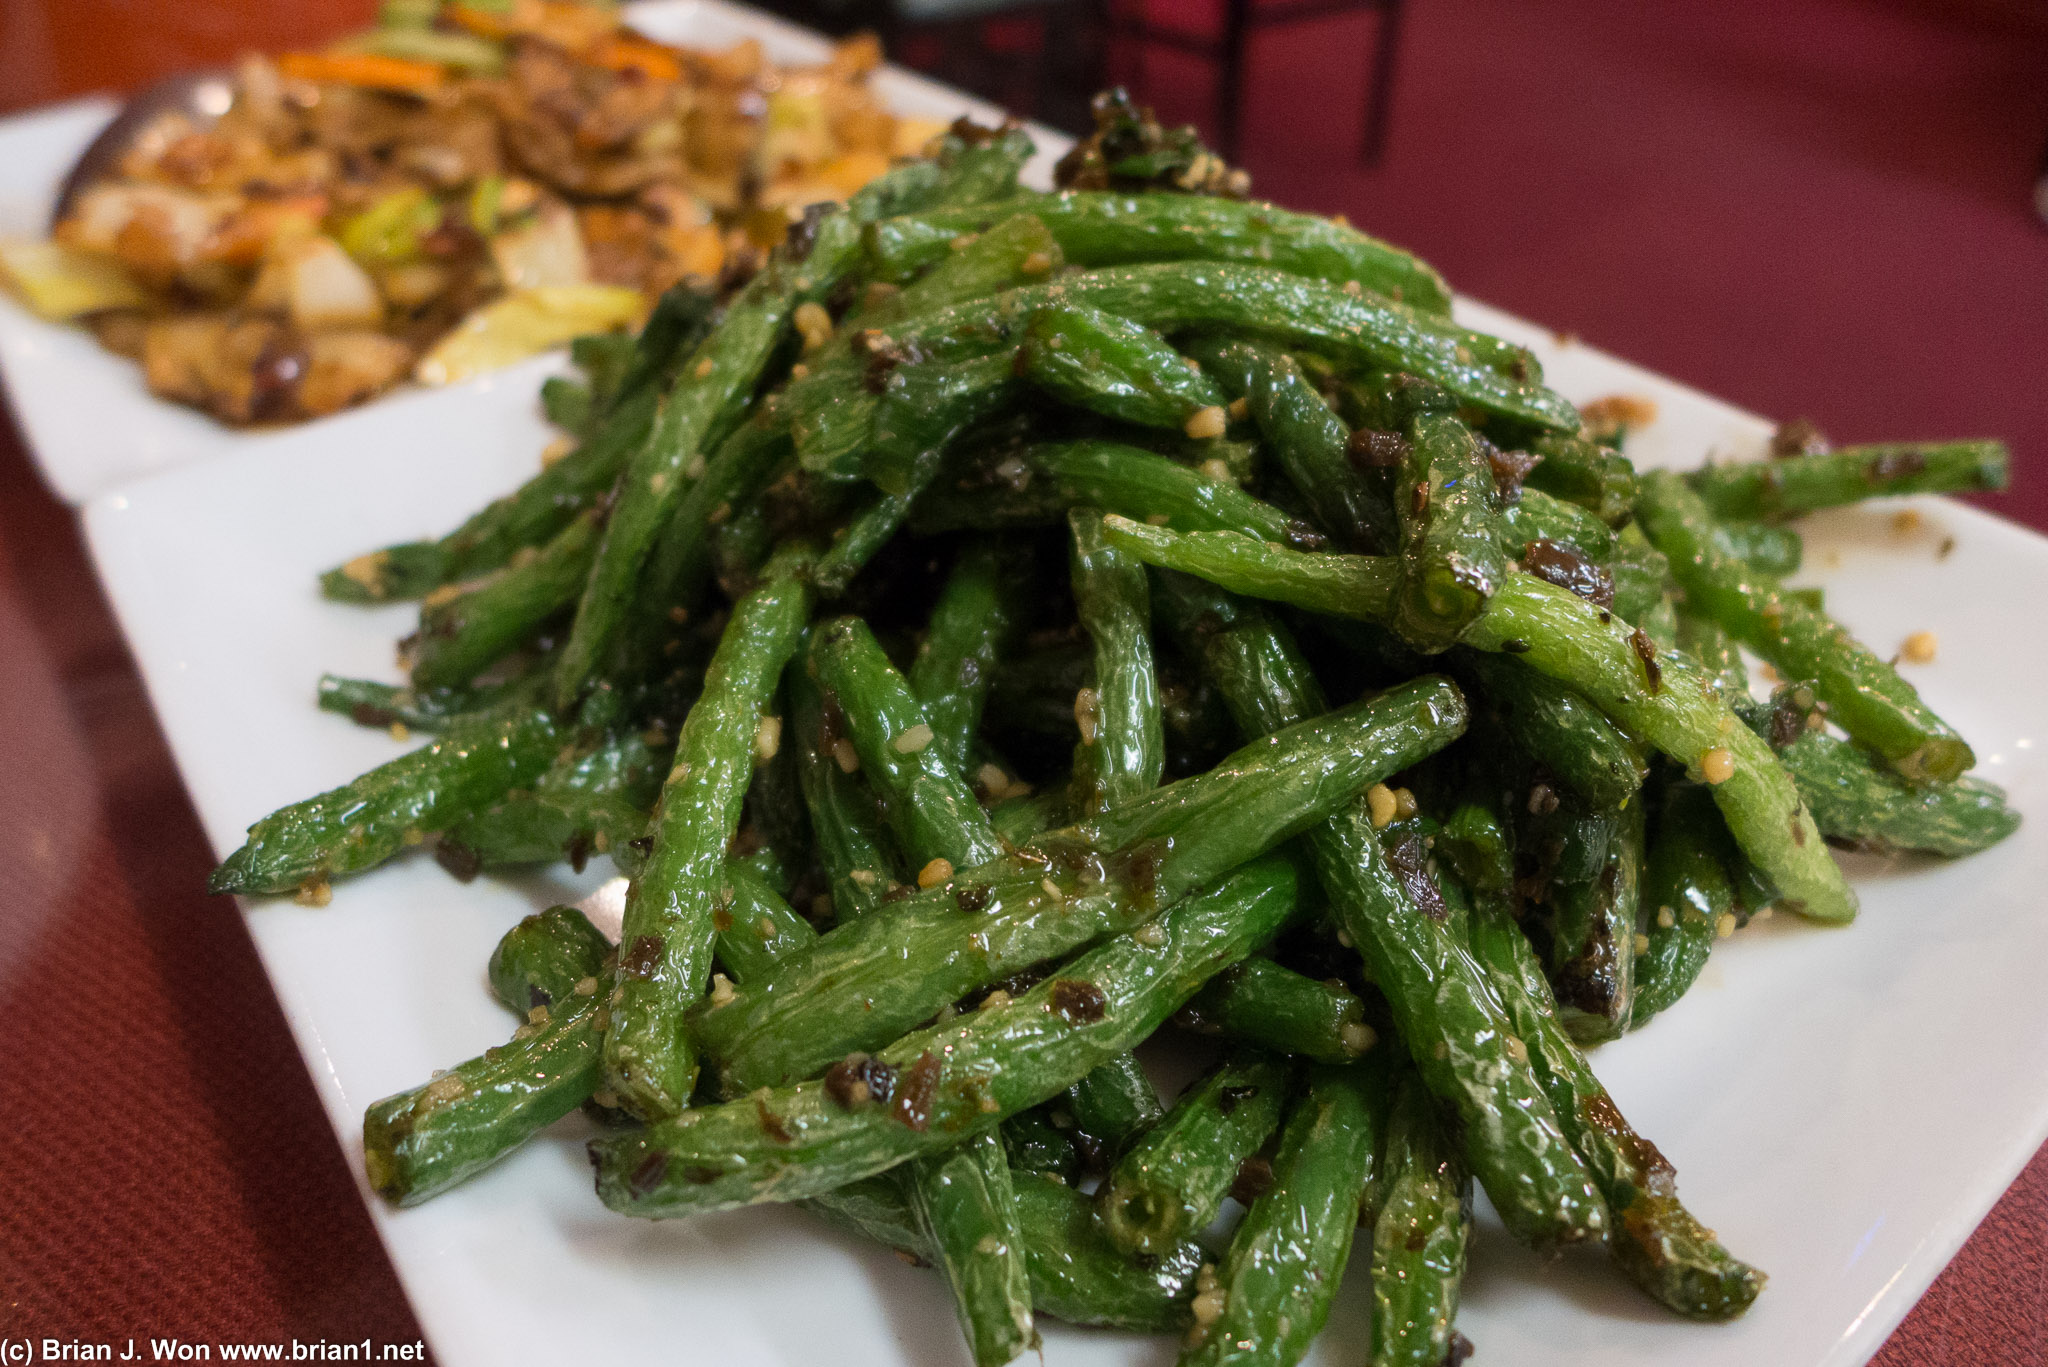 Green beans were superb, and not as spicy as expected.